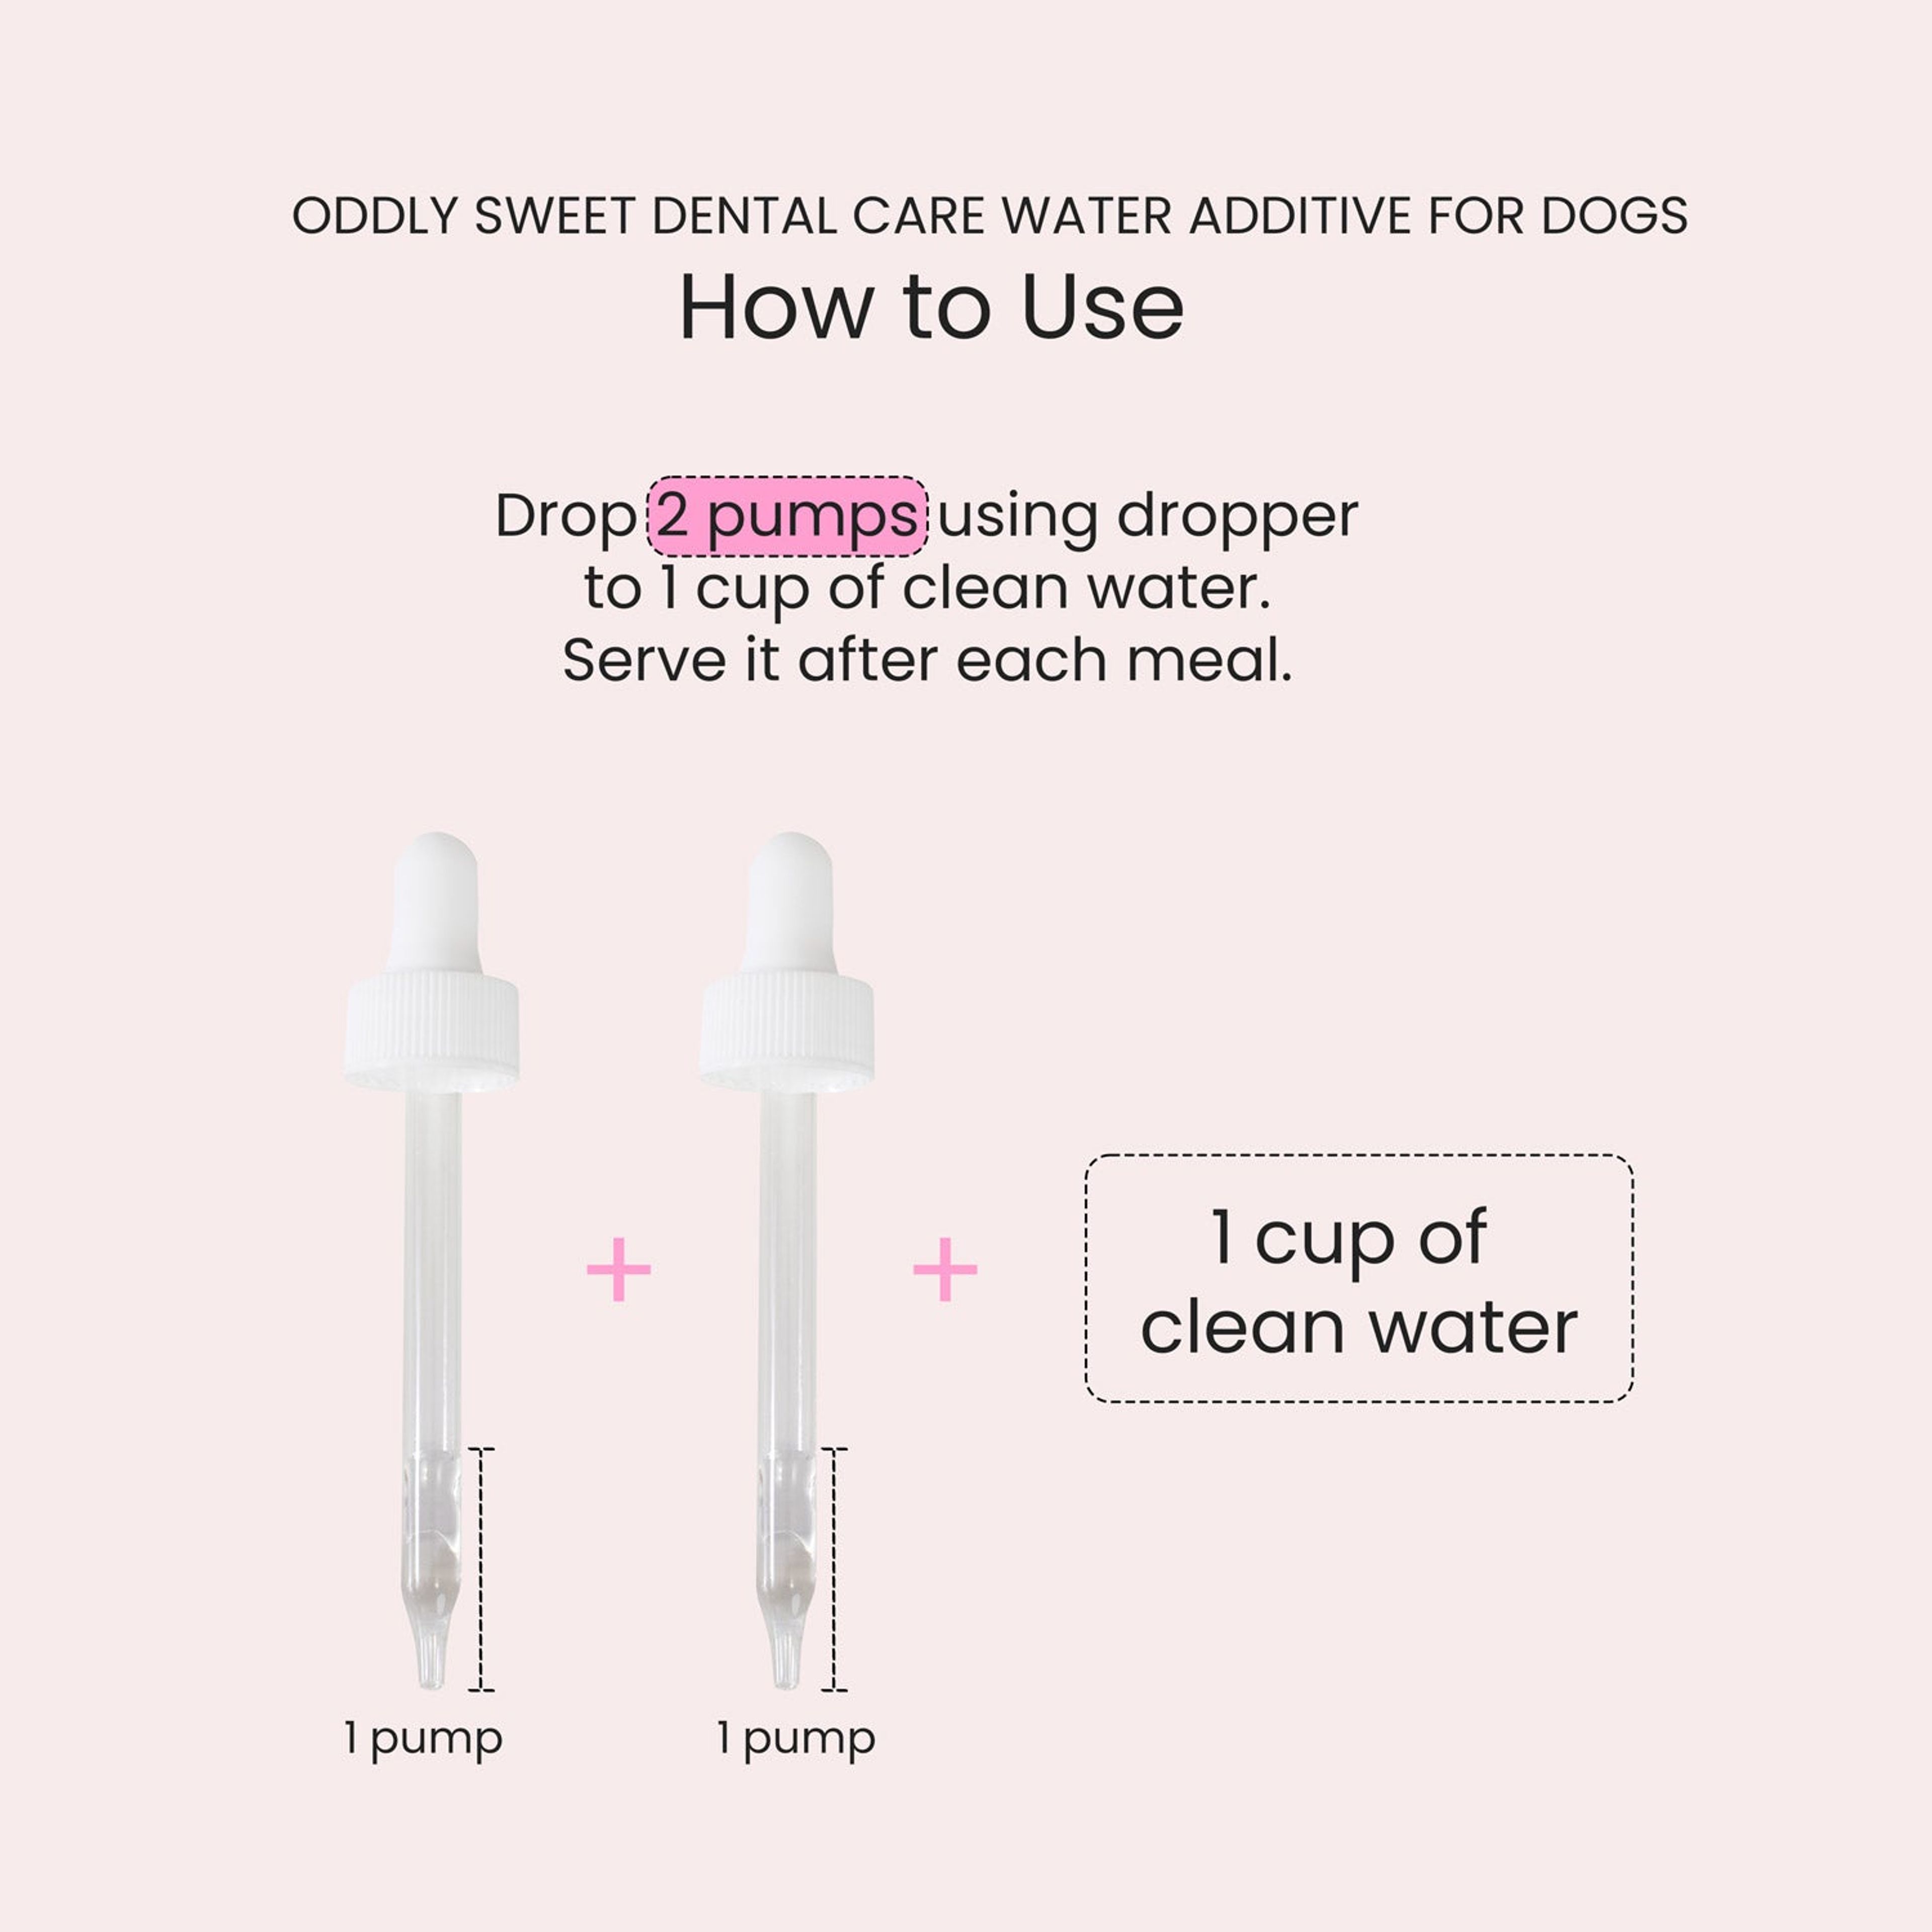 Oddly Sweet Dental Care Water Additive for Dogs